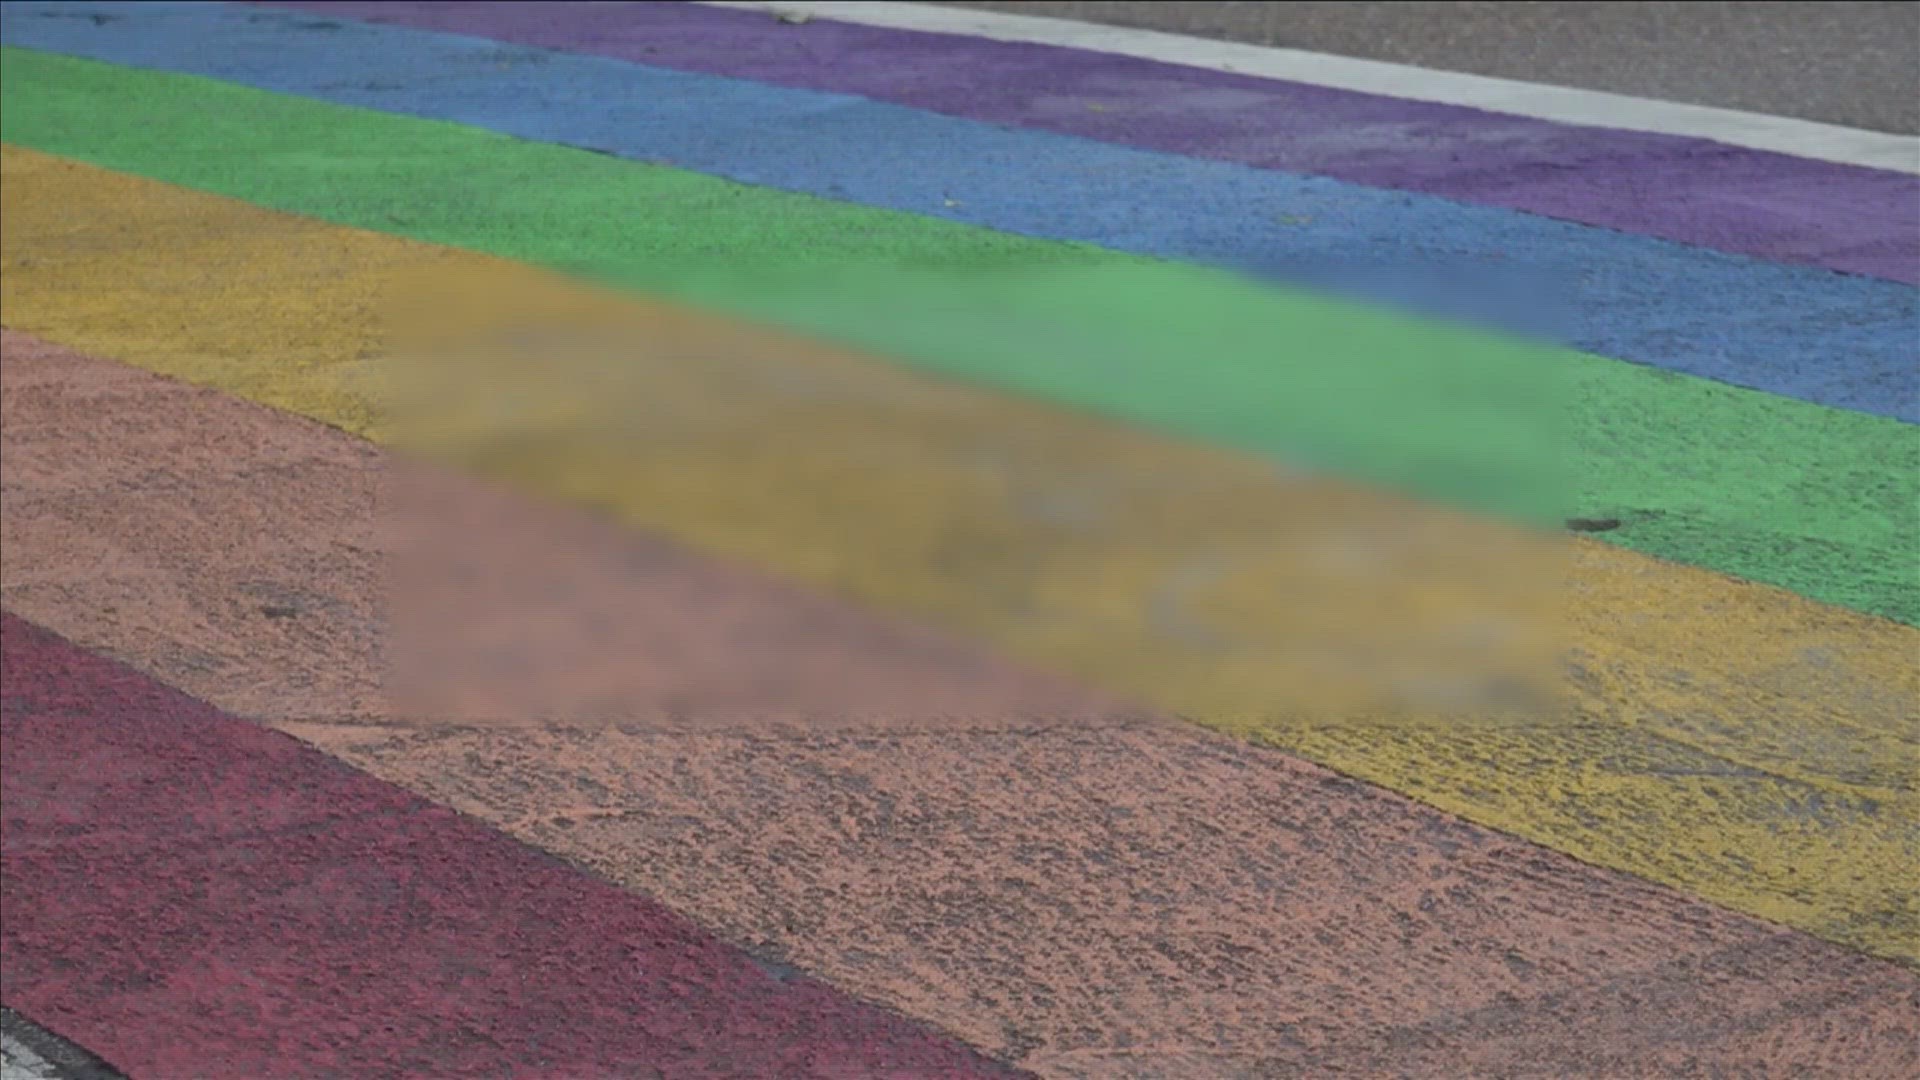 A homophobic slur was found spray-painted on Memphis' Rainbow Crosswalk in Cooper-Young on Saturday.